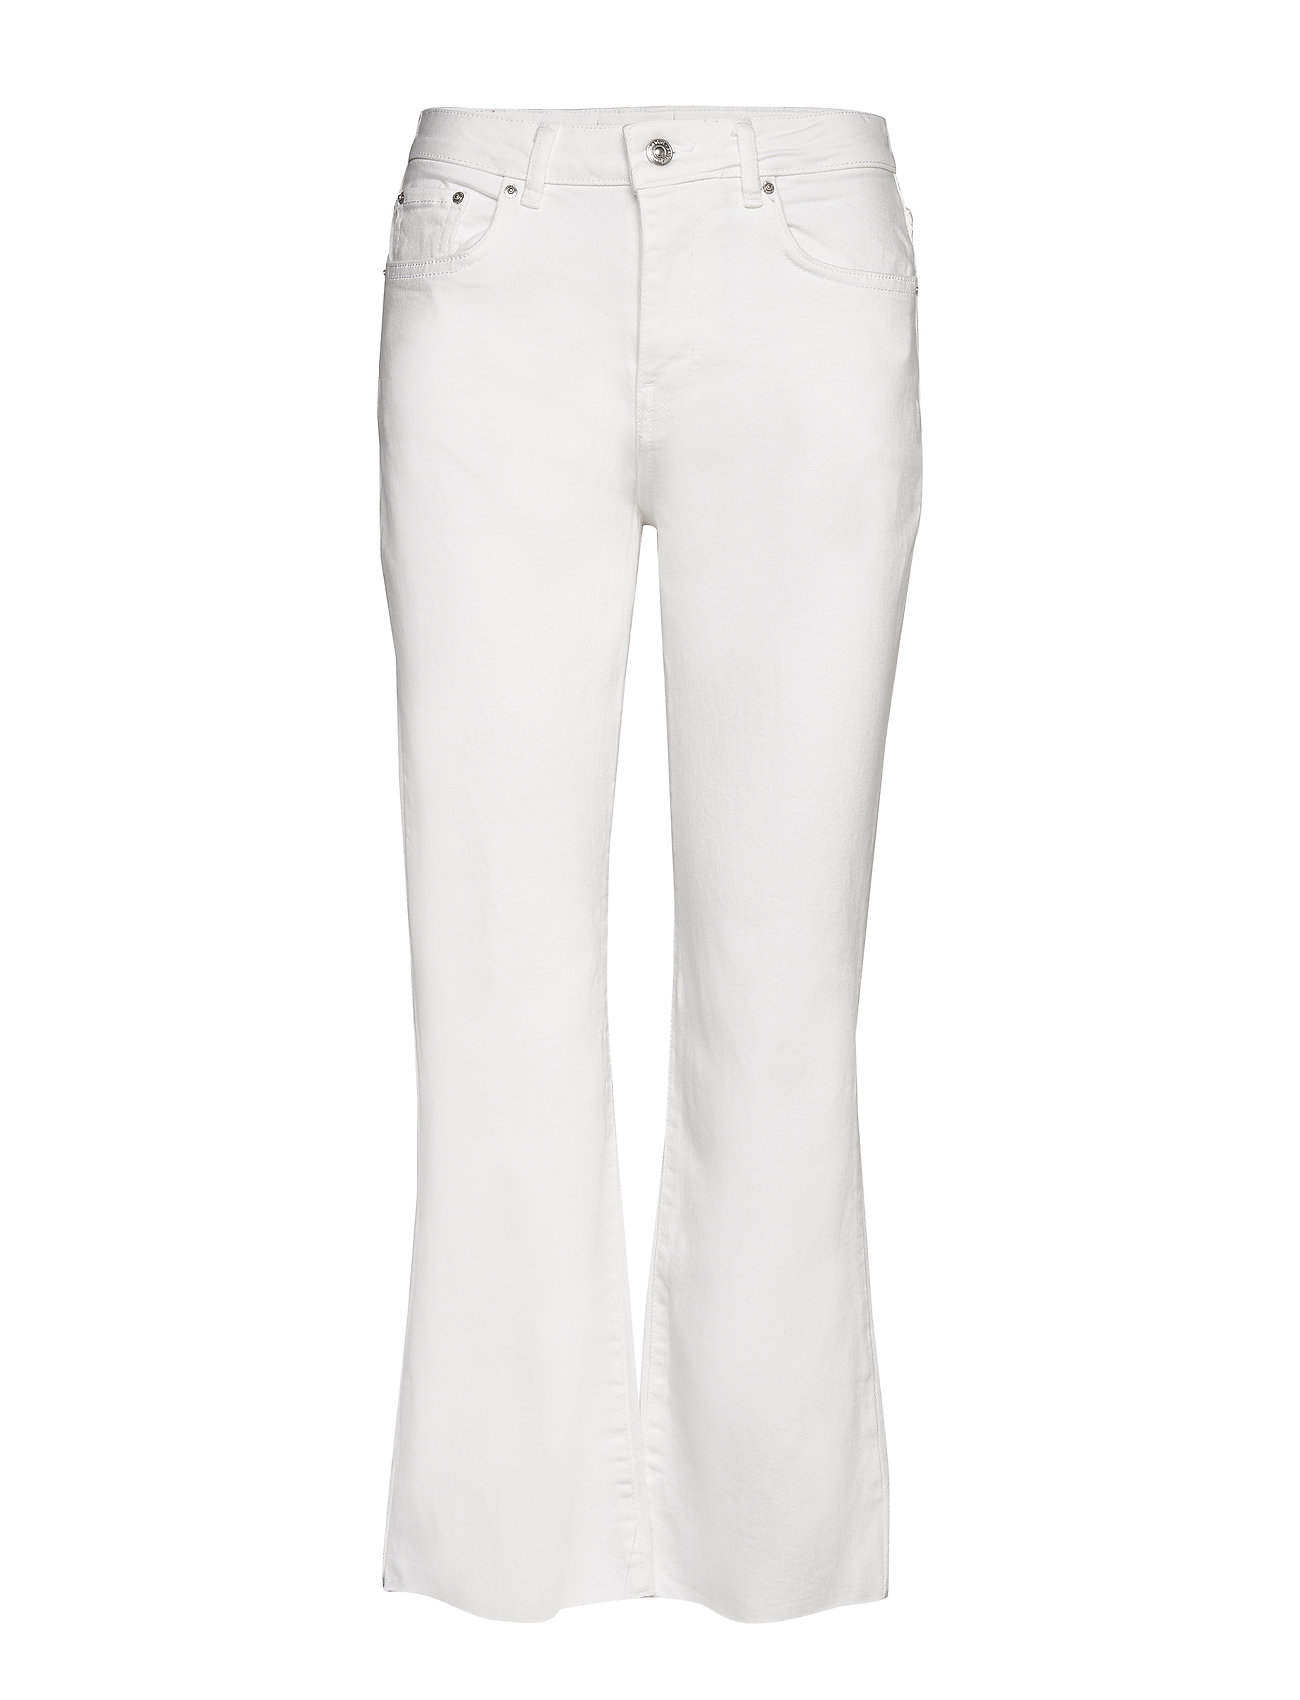 flare jeans gina tricot